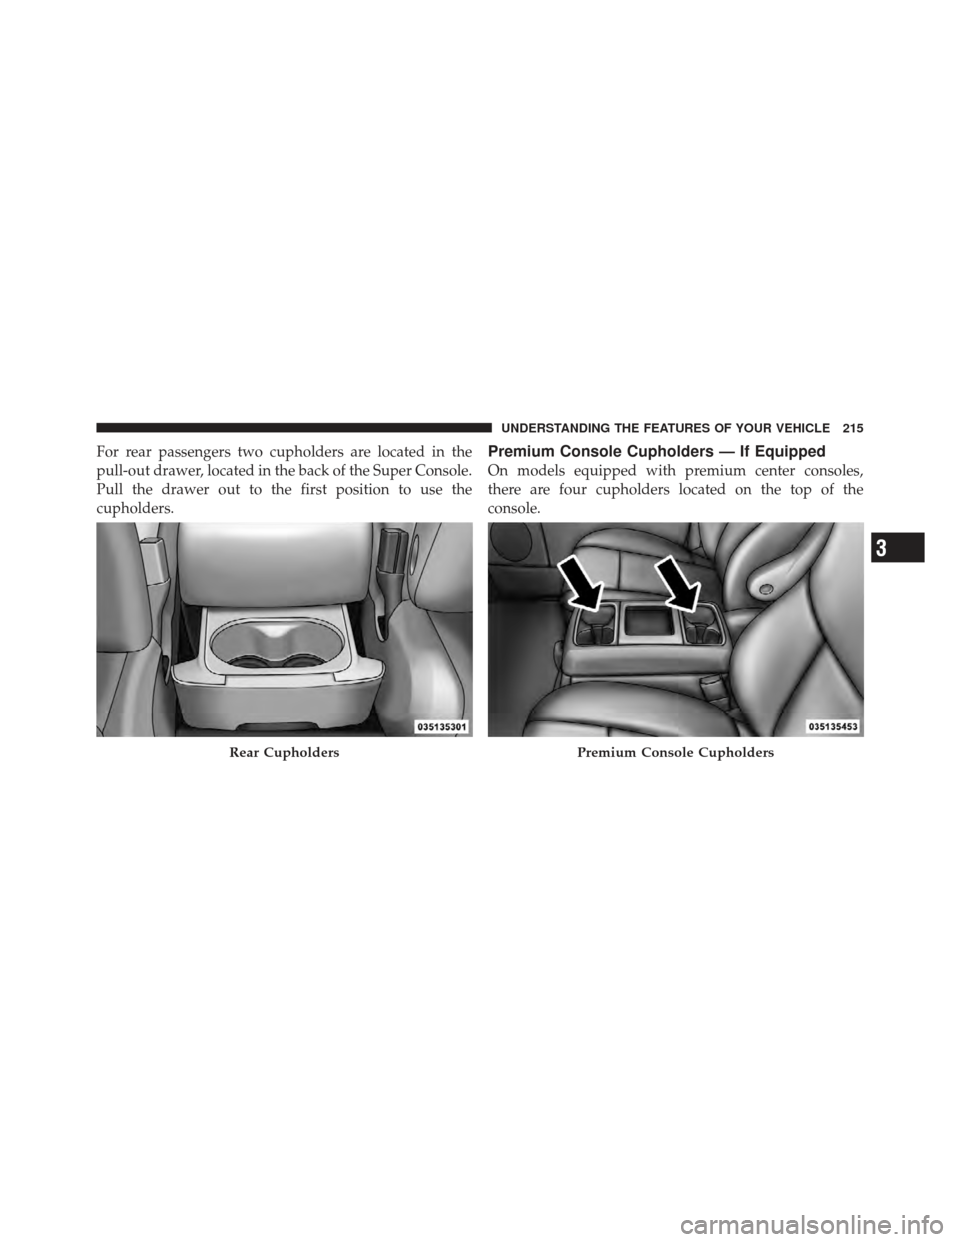 DODGE GRAND CARAVAN 2011 5.G Owners Manual For rear passengers two cupholders are located in the
pull-out drawer, located in the back of the Super Console.
Pull the drawer out to the first position to use the
cupholders.Premium Console Cuphold